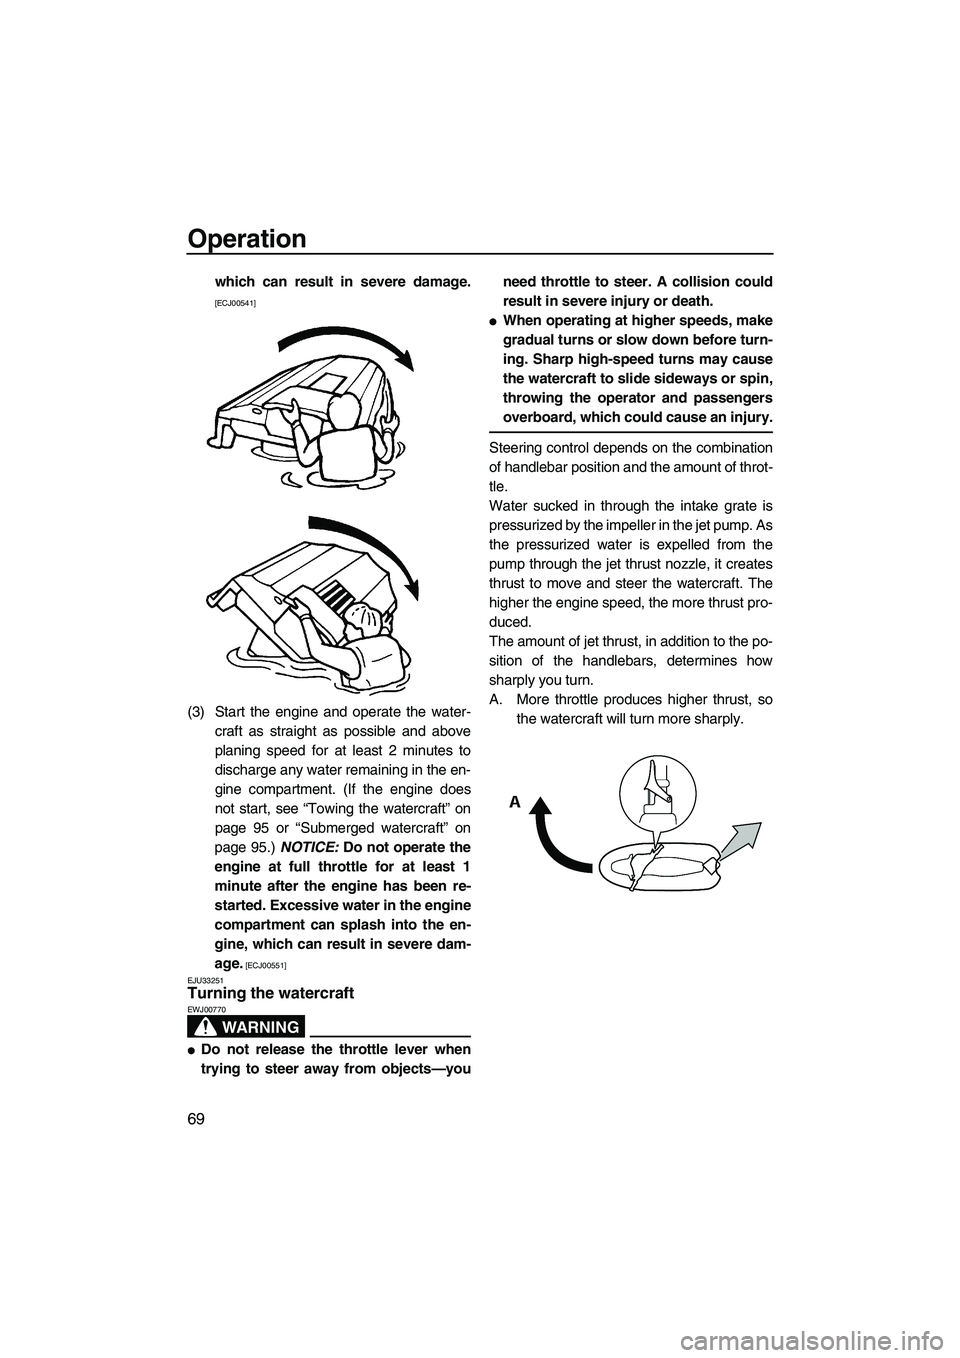 YAMAHA FX HO CRUISER 2009  Owners Manual Operation
69
which can result in severe damage.
[ECJ00541]
(3) Start the engine and operate the water-
craft as straight as possible and above
planing speed for at least 2 minutes to
discharge any wat